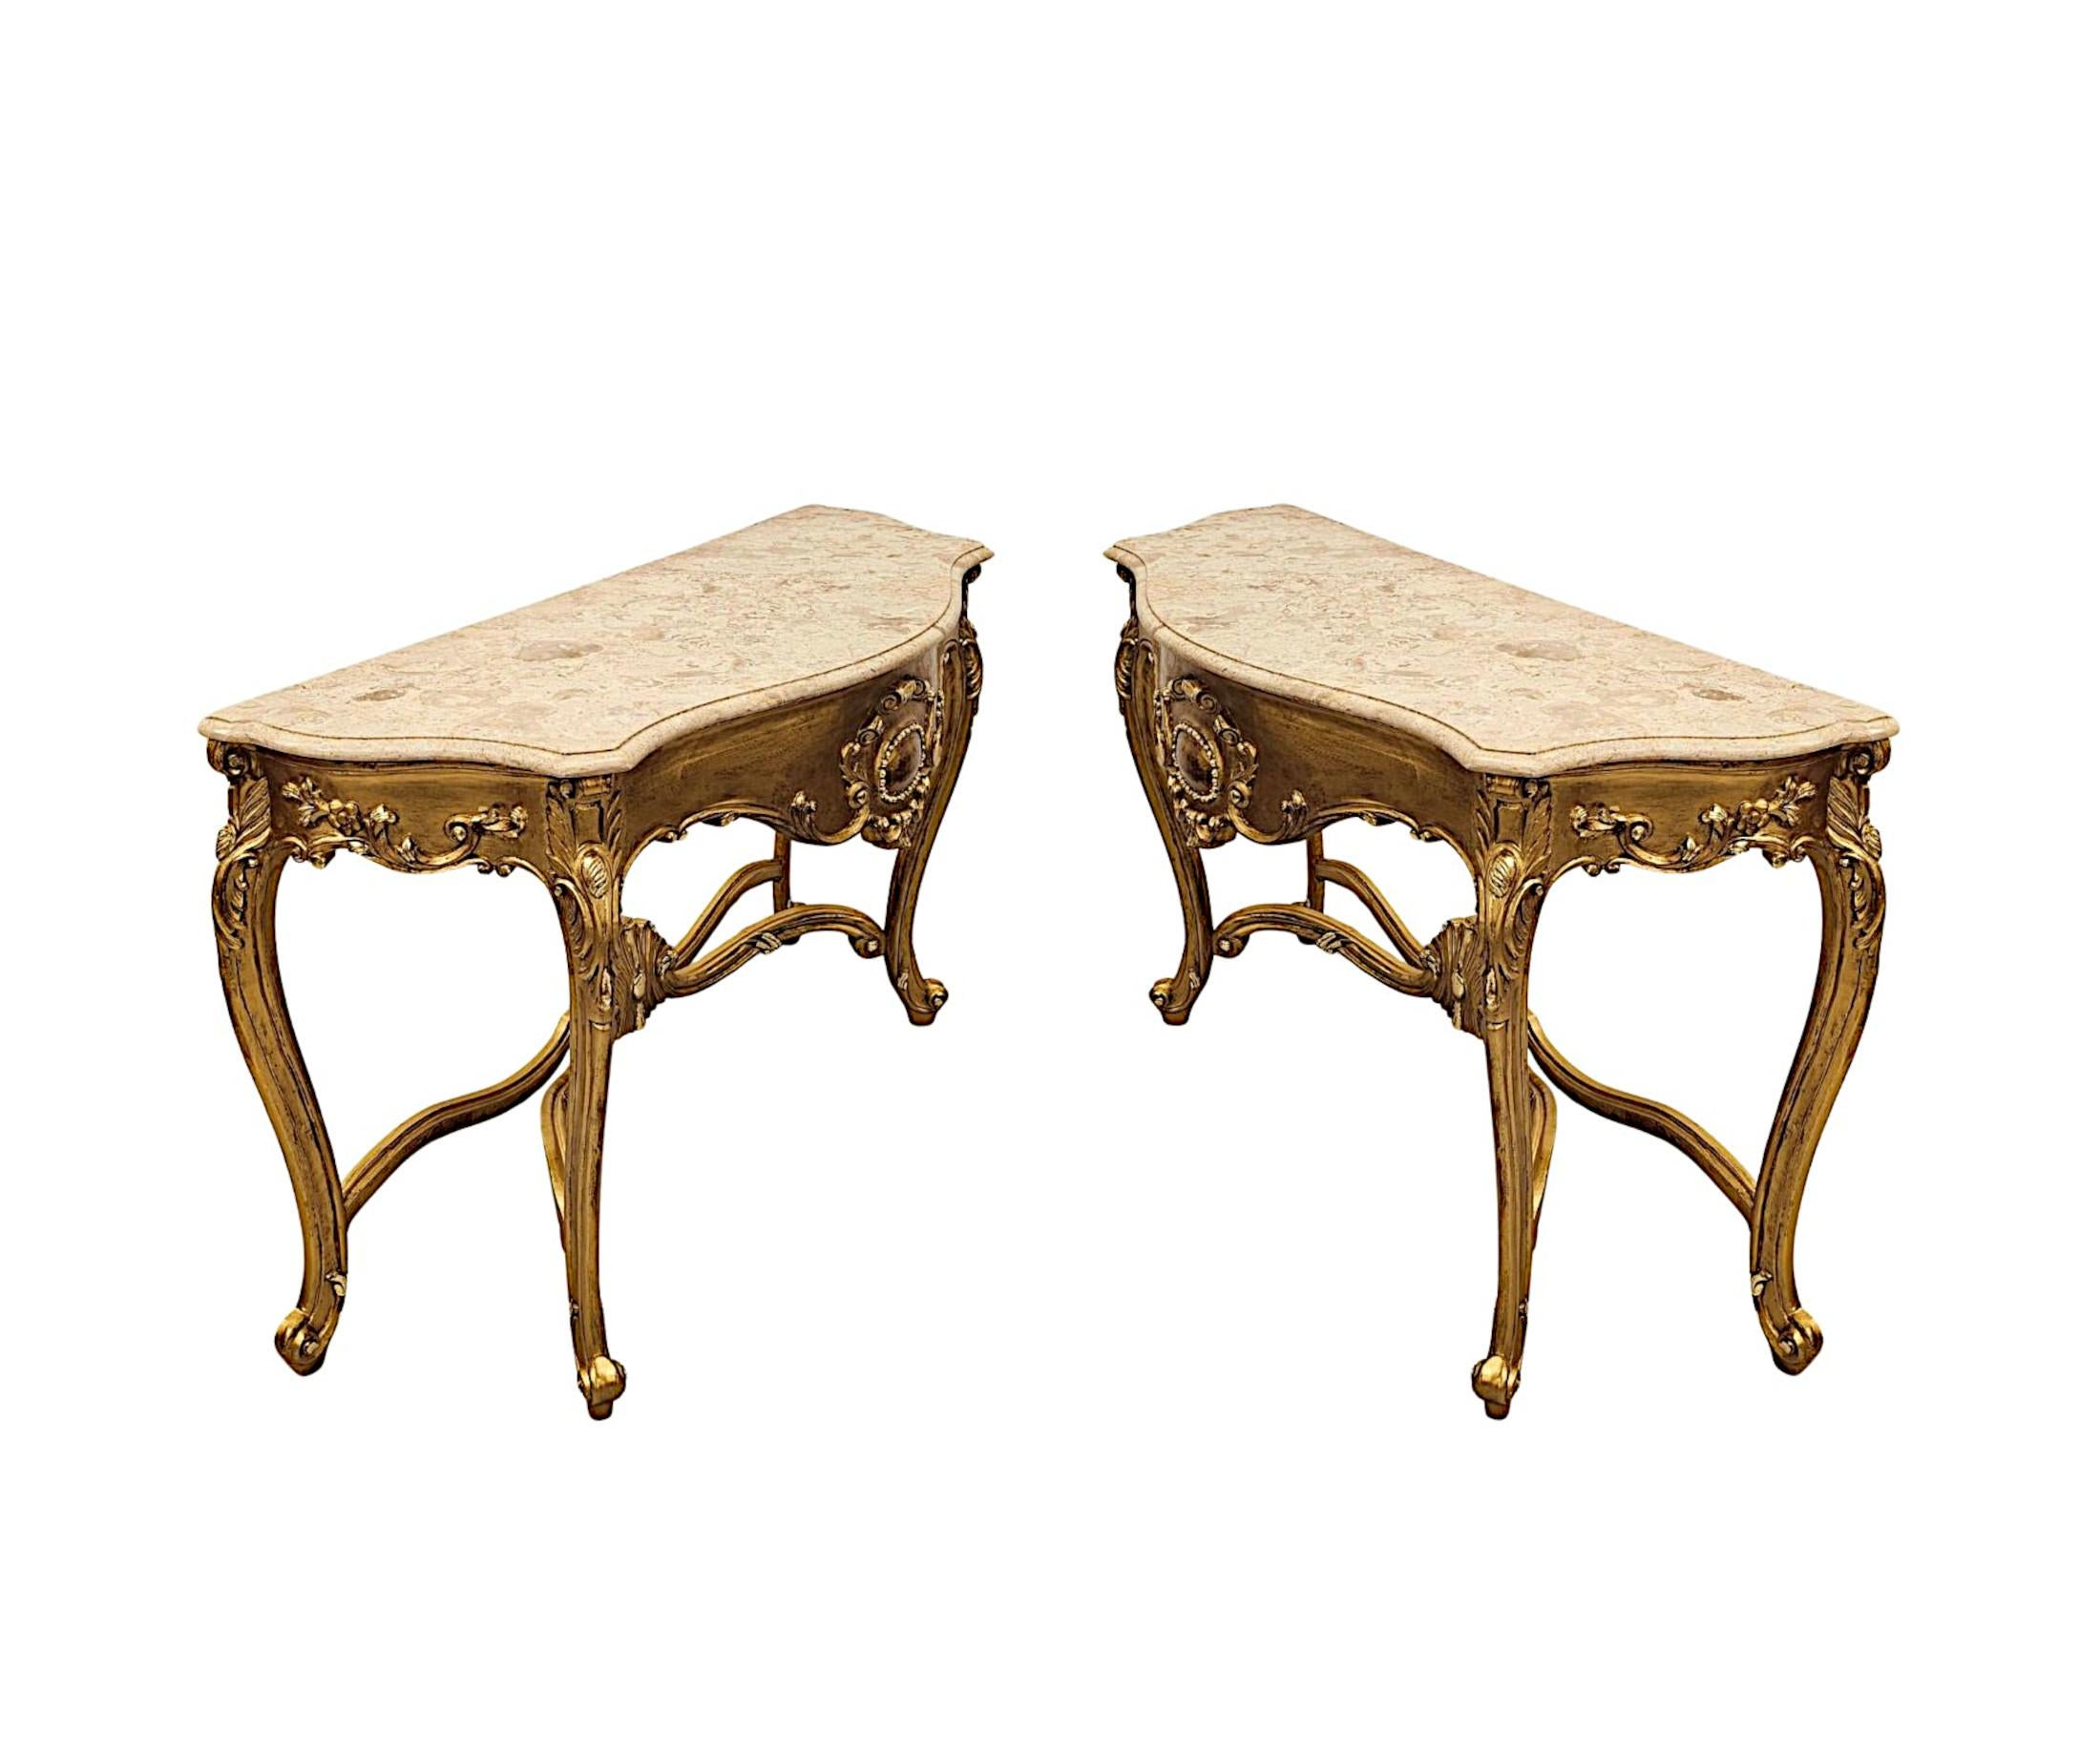 A very fine pair of early 20th Century marble top giltwood console tables, superbly hand carved and of exceptional quality. The gorgeous, moulded cream and gold Calcutta serpentine marble top of rectangular form with canted corners is raised over